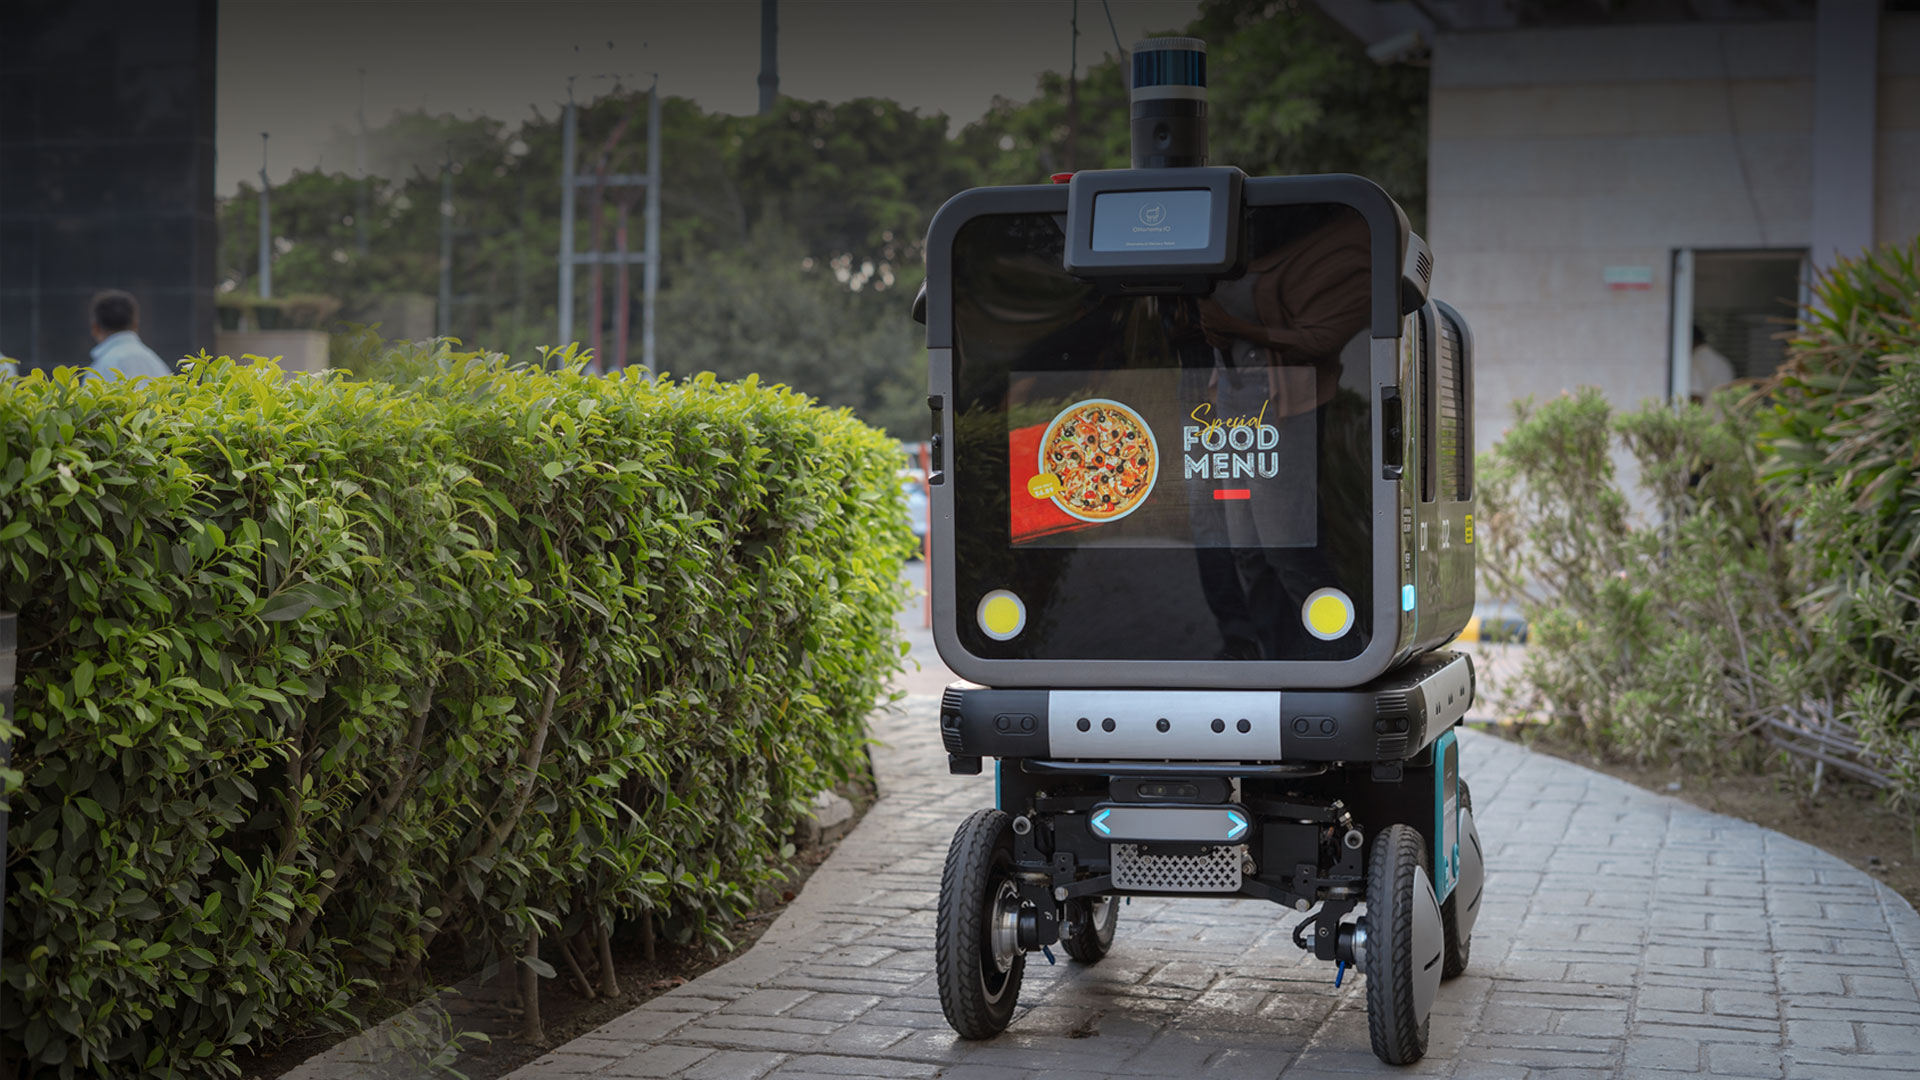 Contactless Delivery.
Anytime. Anywhere. - Delivery Robot